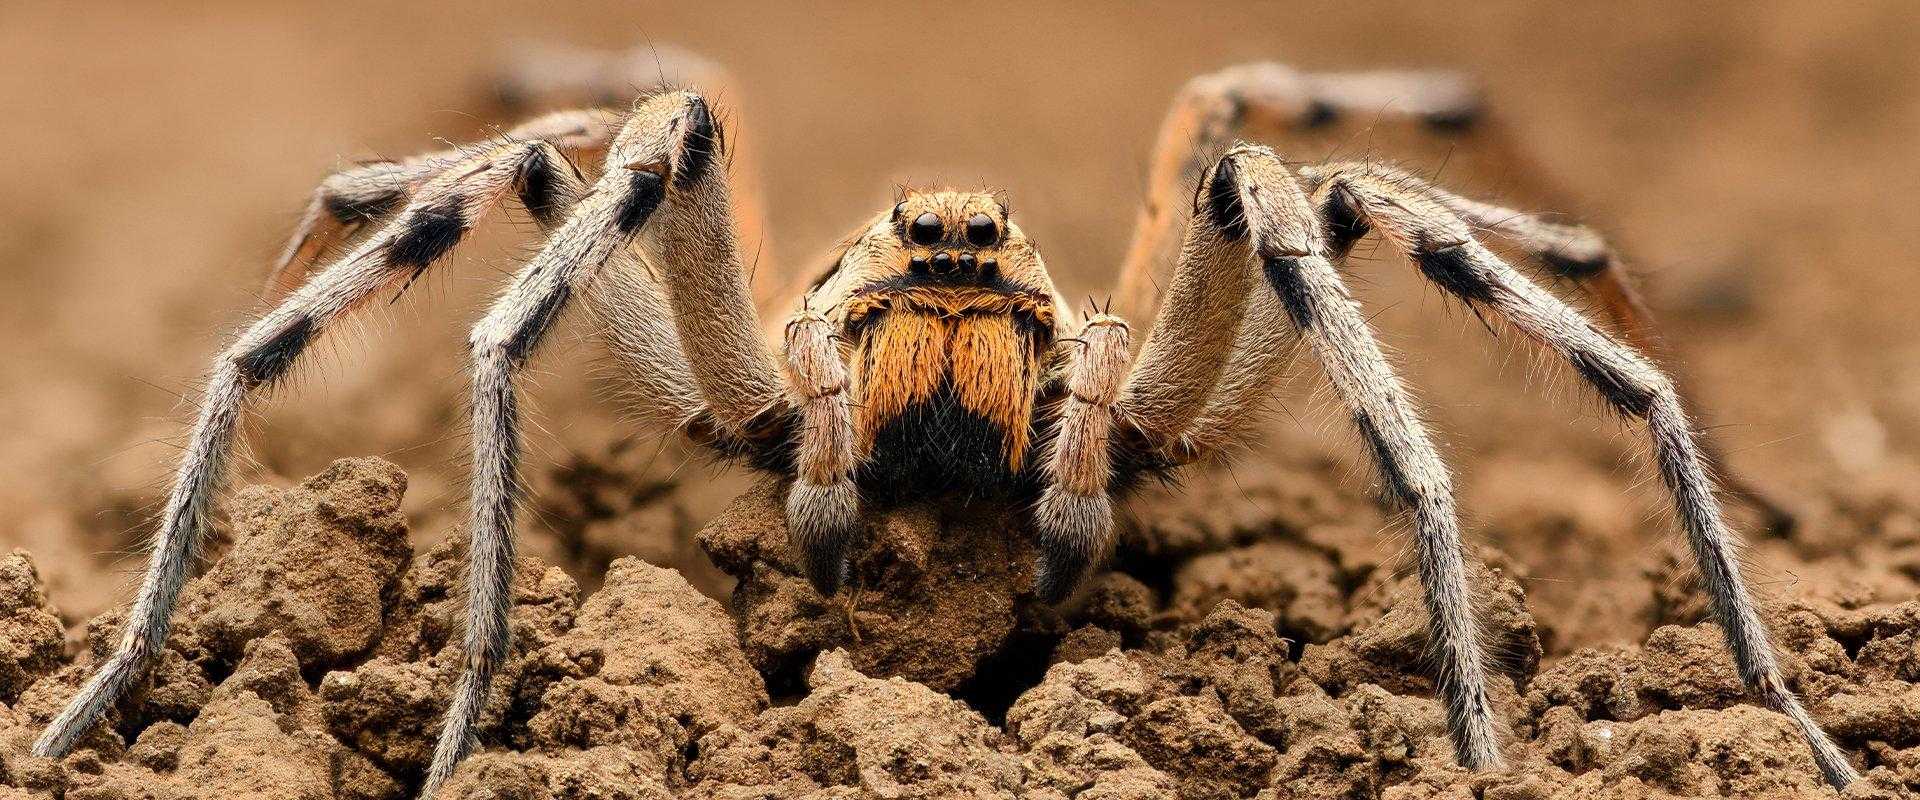 wolf spider on dirt in south florida